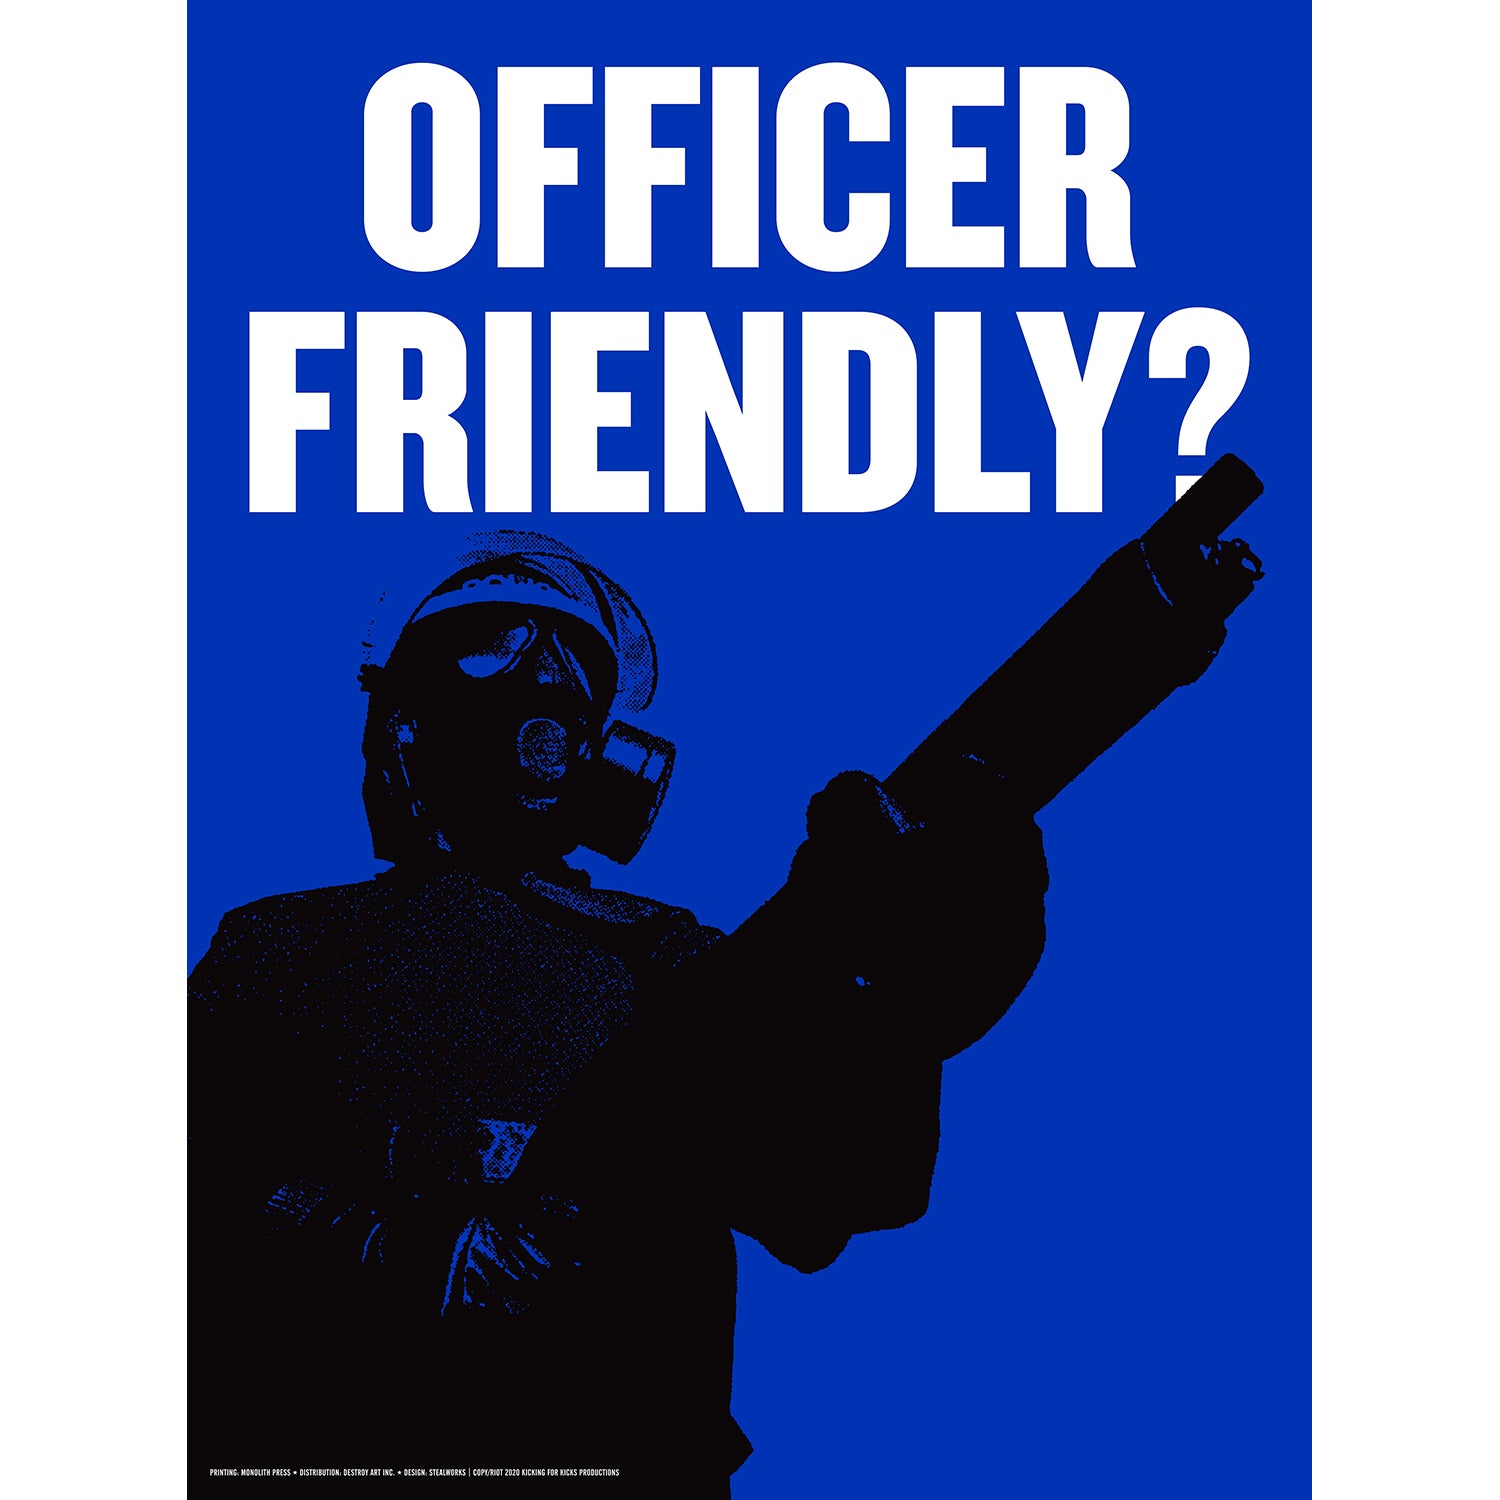 ARTIST JOHN YATES RELEASES THREE NEW LIMITED "OFFICER FRIENDLY?" POSTERS